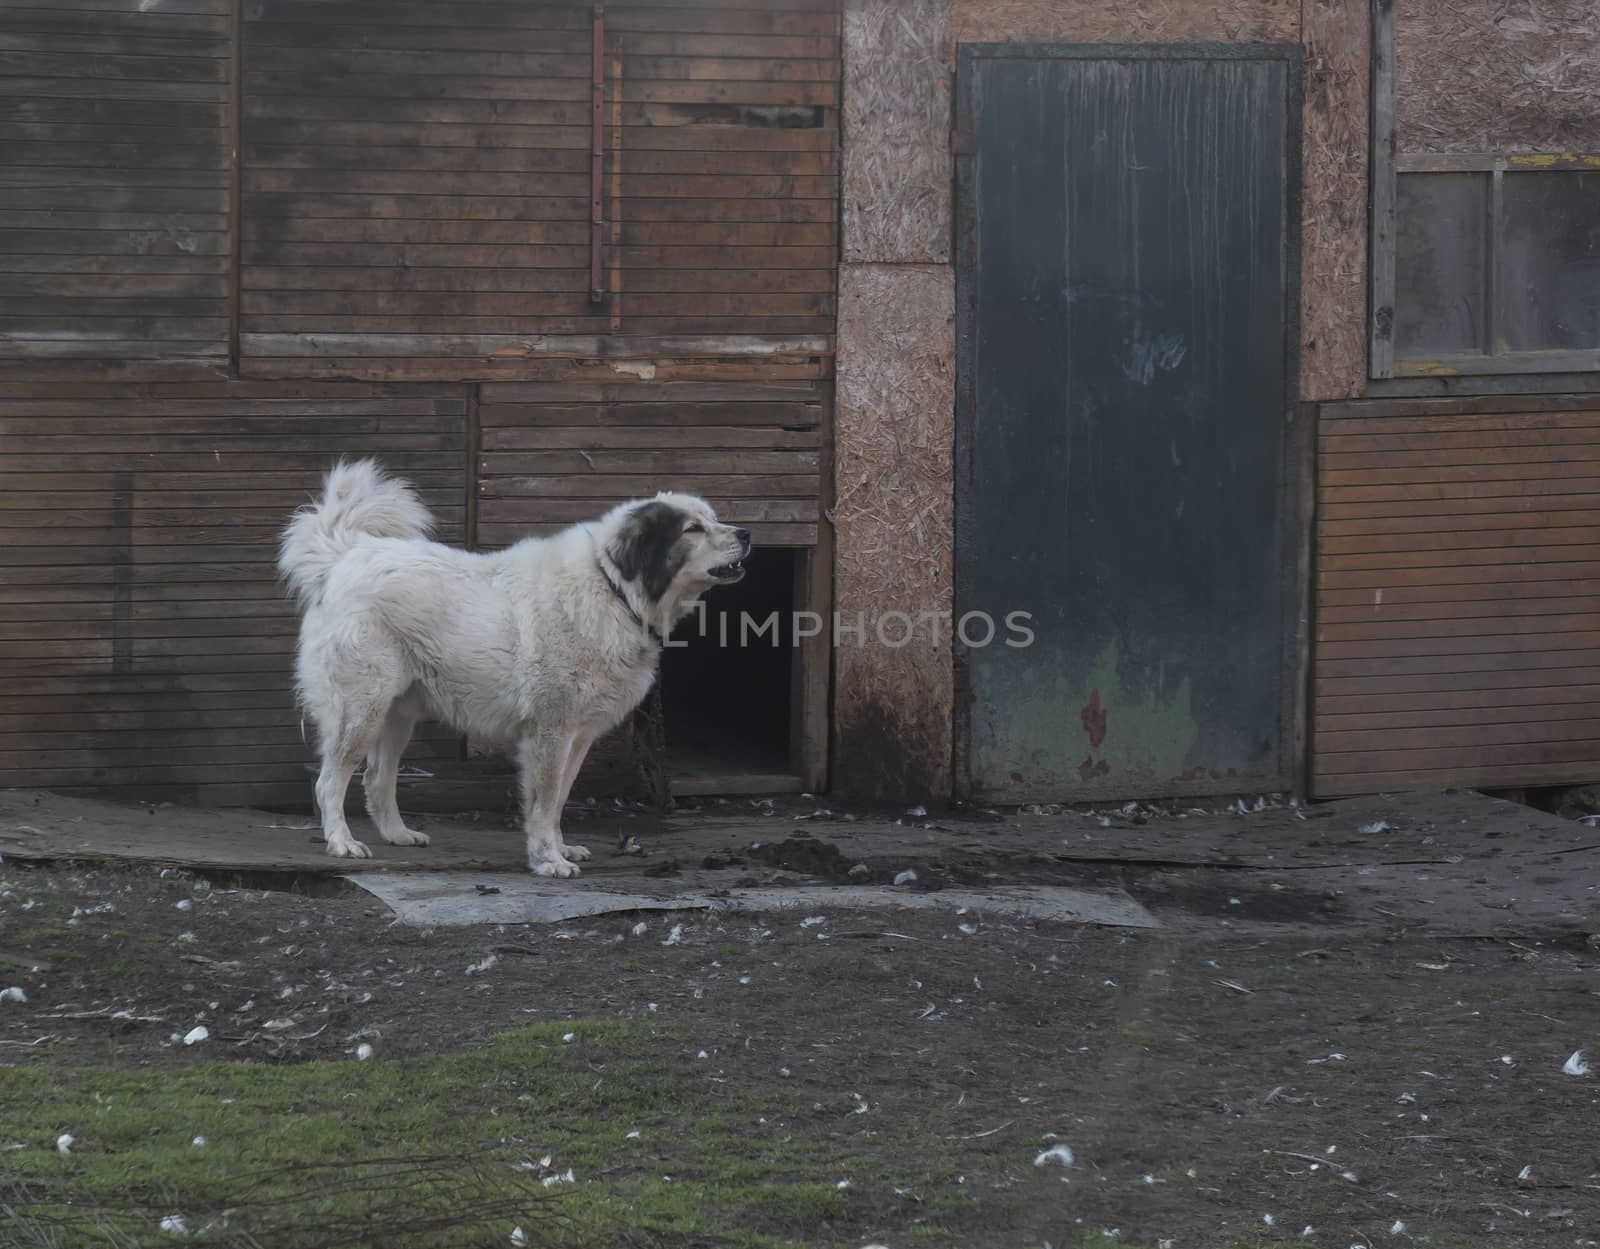 White flufy watchdog dog on chain standing in the yard of wooden shabby house. Muted color, vinage look